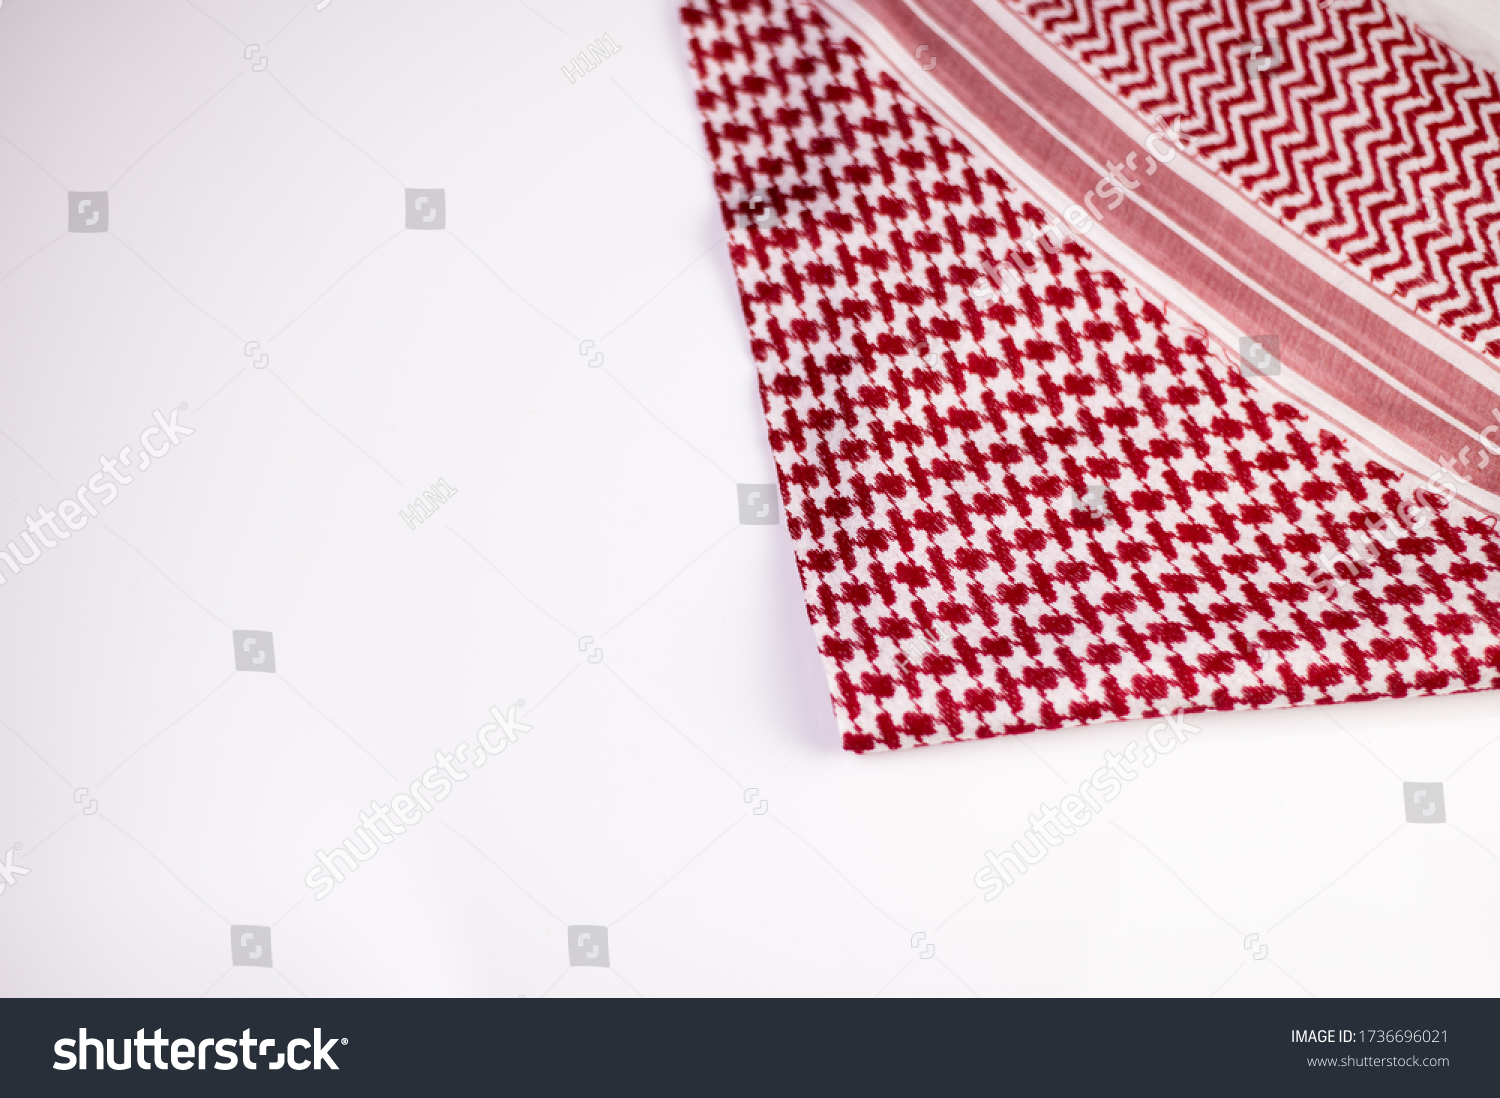 Ghutrah also known as Keffiyeh or Shmag. This item of clothing are usually worn by men as a traditional head-dress in Arab Countries especially in gulf countries such as Saudi Arabia. #1736696021